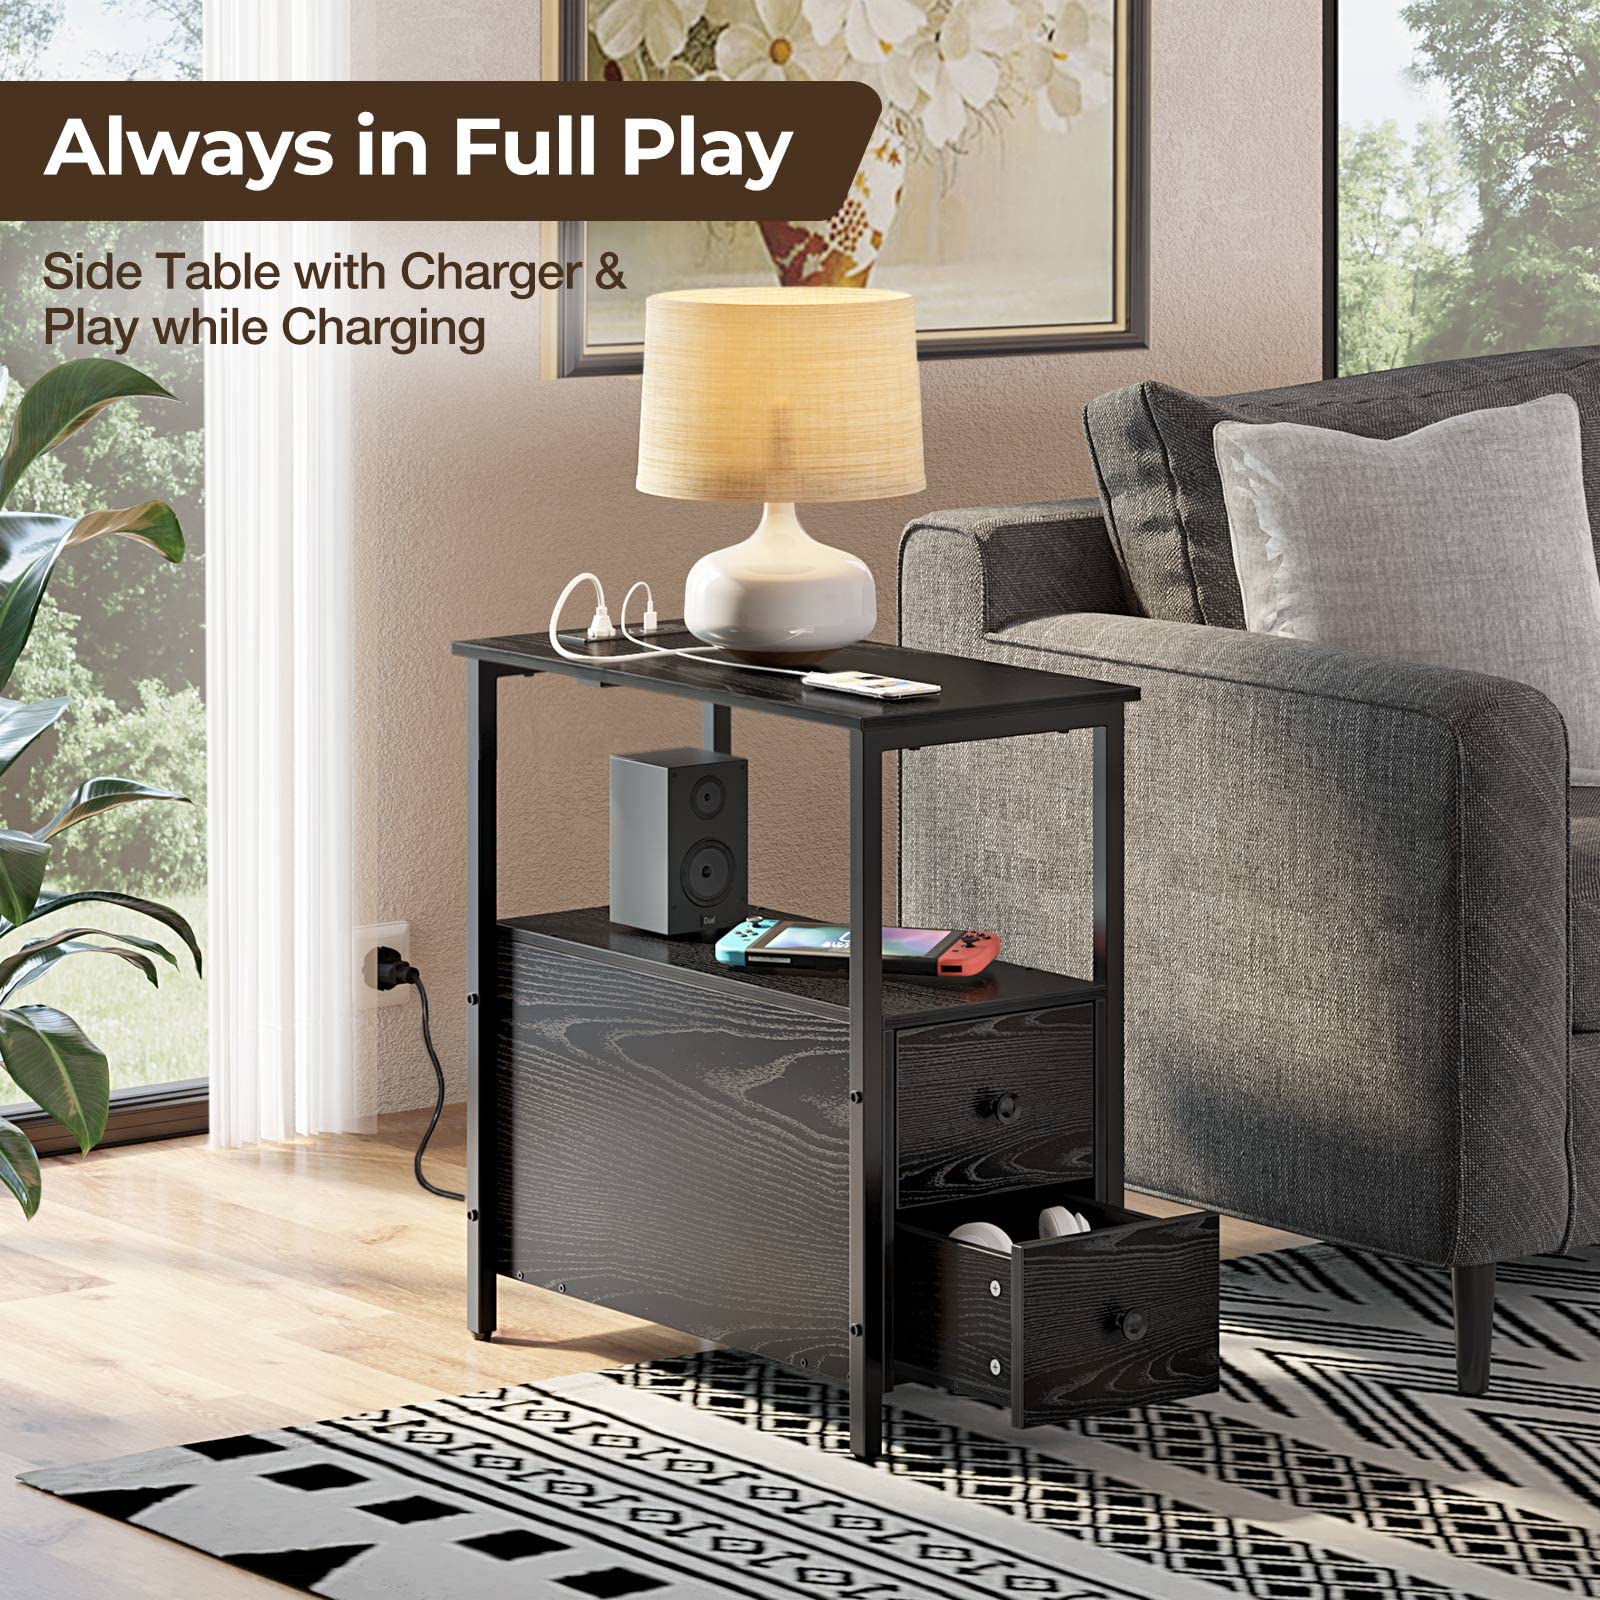 Rolanstar End Table with charging Station, Narrow Side Table with 2 Wooden Drawers, USB Ports and Power Outlets, Nightstand Sofa